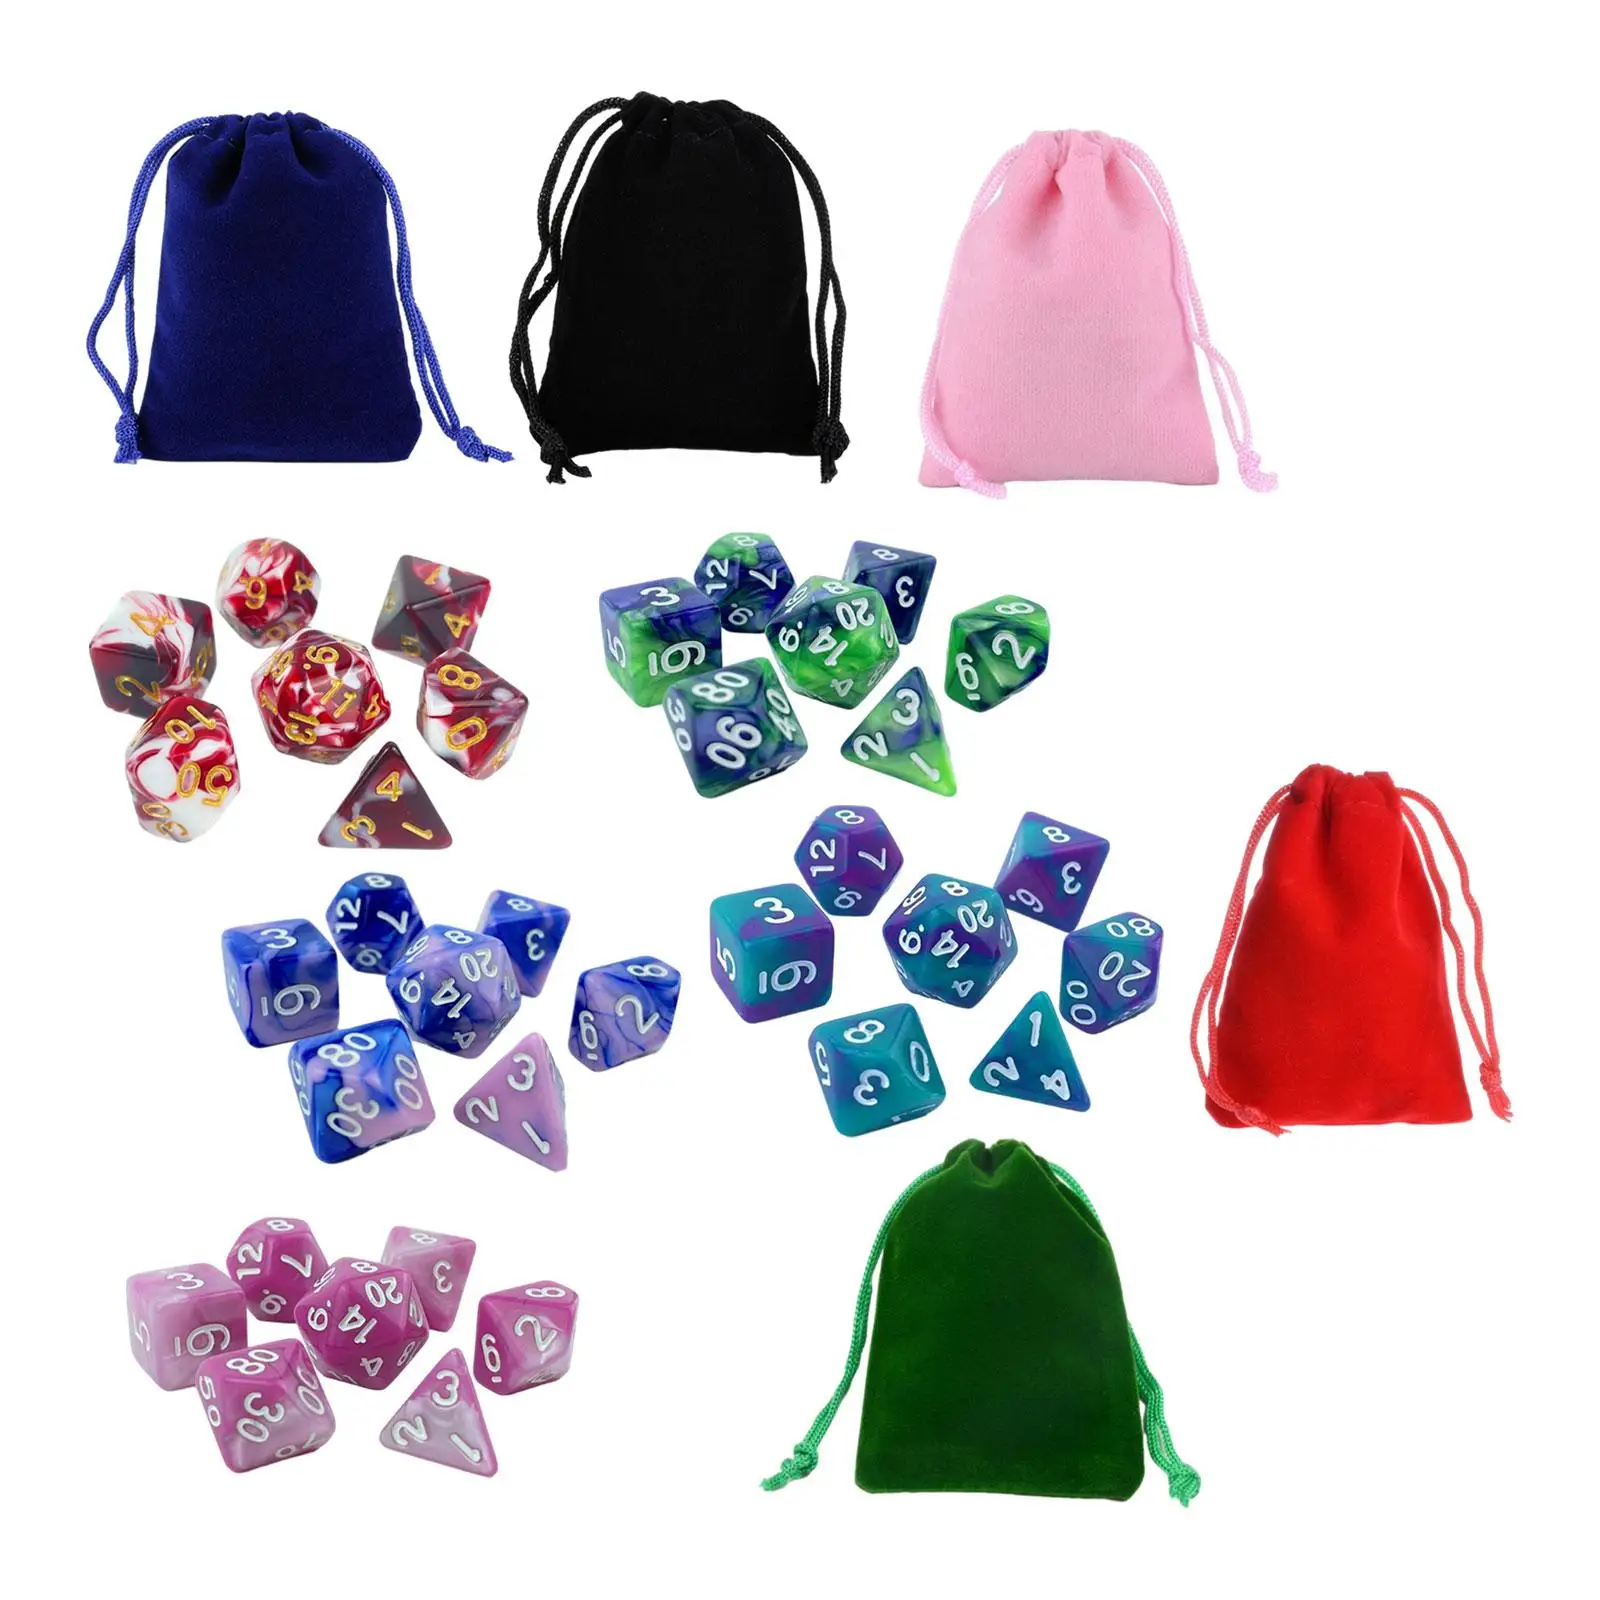 35 Pieces Polyhedral Dices Set with Drawstring Bags Table Game Handmade Dice Entertainment Toy for Wedding Party Favors Cafe